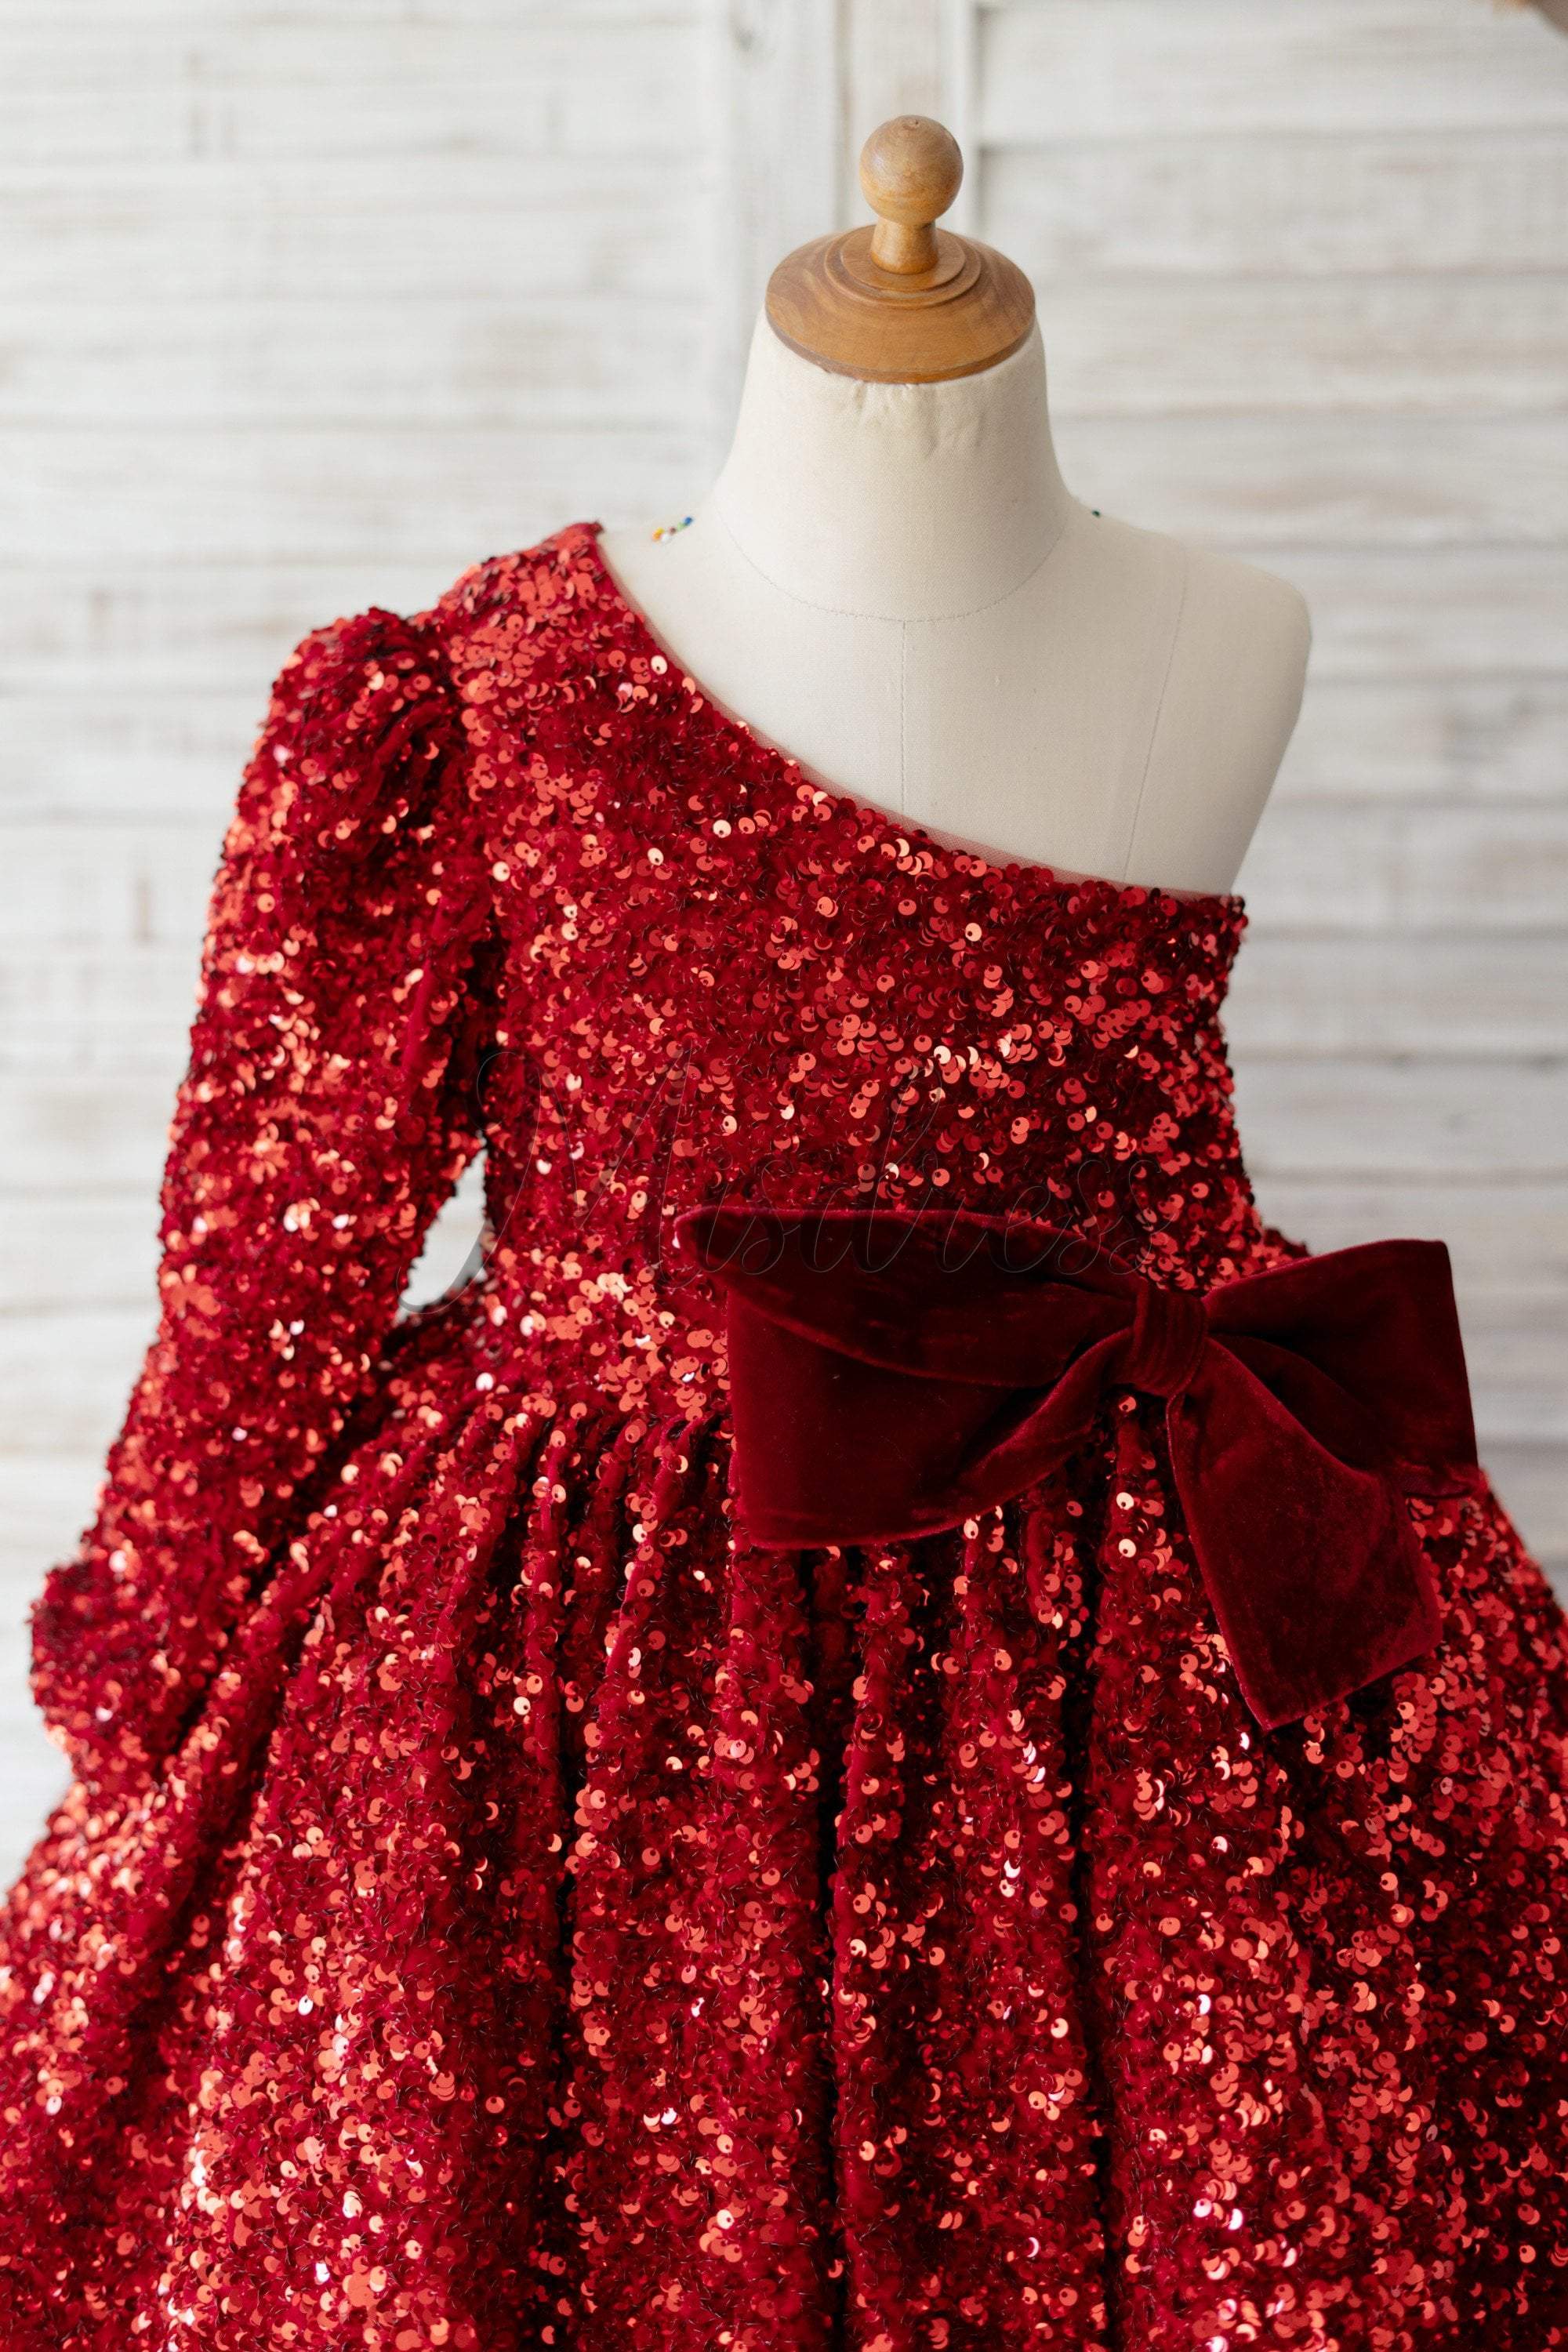 Buy Burgundy Flower Girl Dress Lace, Gold and Burgundy Dress, Burgundy  Wedding Flower Girl Dresses, Lace Girl Dress, Gold Sash, Tutu Dress Online  in India - Etsy